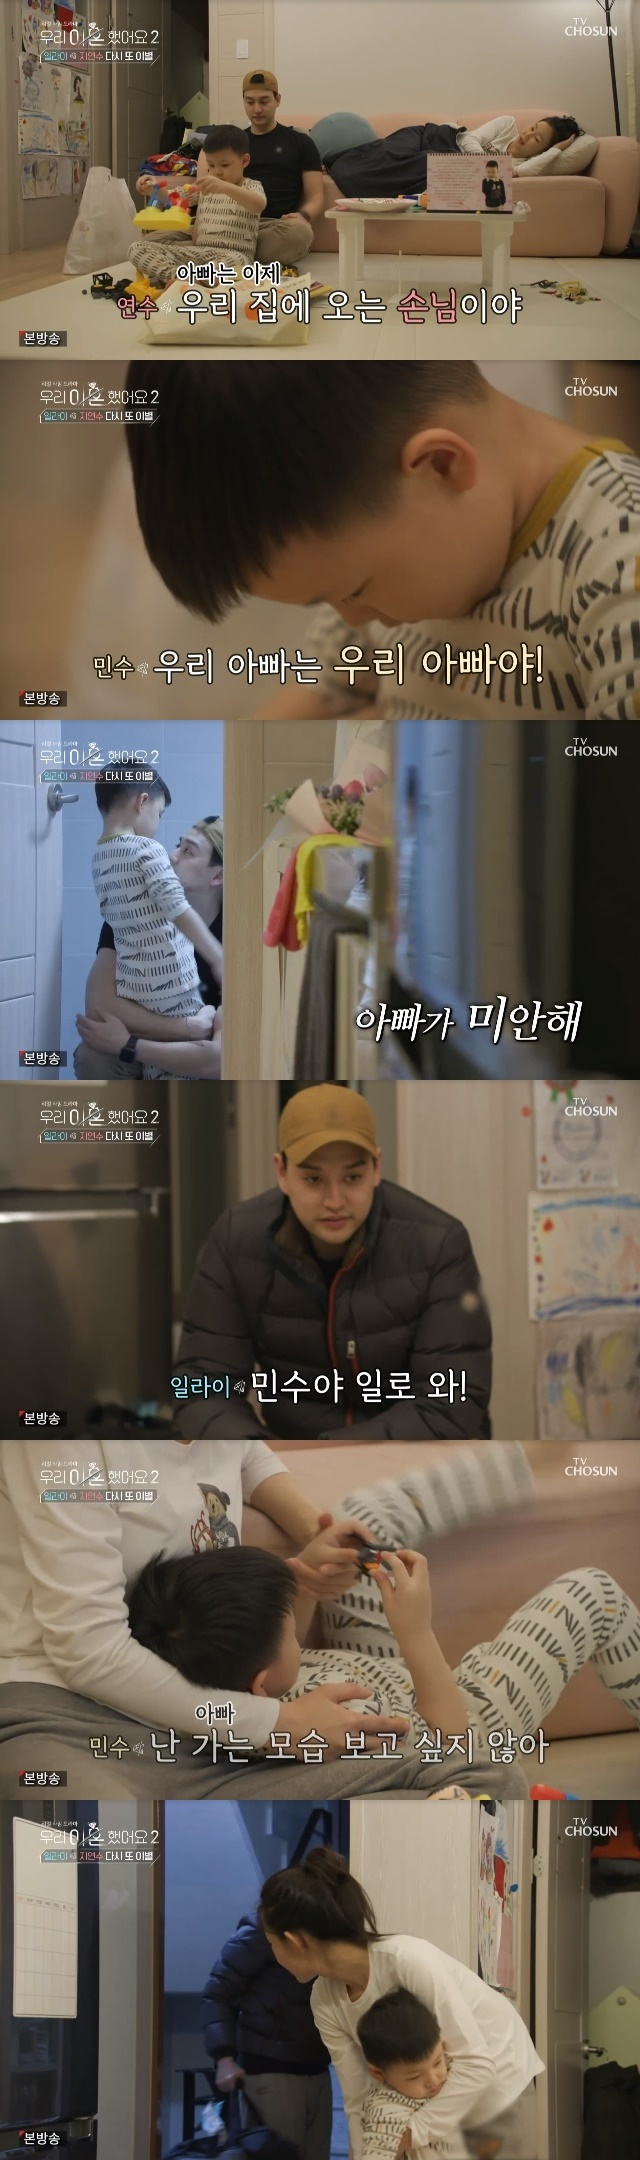 Eli and Ji Yeon-soo son refused to see off after failing to accept partingIn the fourth episode of We Divorce 2 (hereinafter referred to as Udivorce 2), a TV Chosun entertainment show broadcast on April 29, it was time for Eli to break up with his son Minsu.On the day, Minsu caught him, saying, Dont go, just live in my house, ahead of his breakup with Eli, saying: Father is now The Piper coming to my house.Im Gaya, Minsu explained, but Its not The Piper. Fathers just our Father.Our Father is not The Piper, its our Father, so we have to live (like) for the rest of our lives, he responded.Eli explained to Minsu that Father is someone who doesnt live with her mother anymore, which Eli said: I dont think thats it, if youve come, sleep through and Gaya.We are family, he said, Im sorry to Minsu.Later, when Eli really left, Ji Yeon-soo ordered Minsu to see off Father.But Minsu said, I do not want to see you go. He did not wake up and greeted Eli.Kim said, In fact, when I was a child, people felt a lot of emotions. The hardest feelings were broken up.But we Minsu seems to feel the hardest feeling with my favorite person, so it is too bad. Kim Won-hee said, I do not think I can hold it now, so I can not see it.